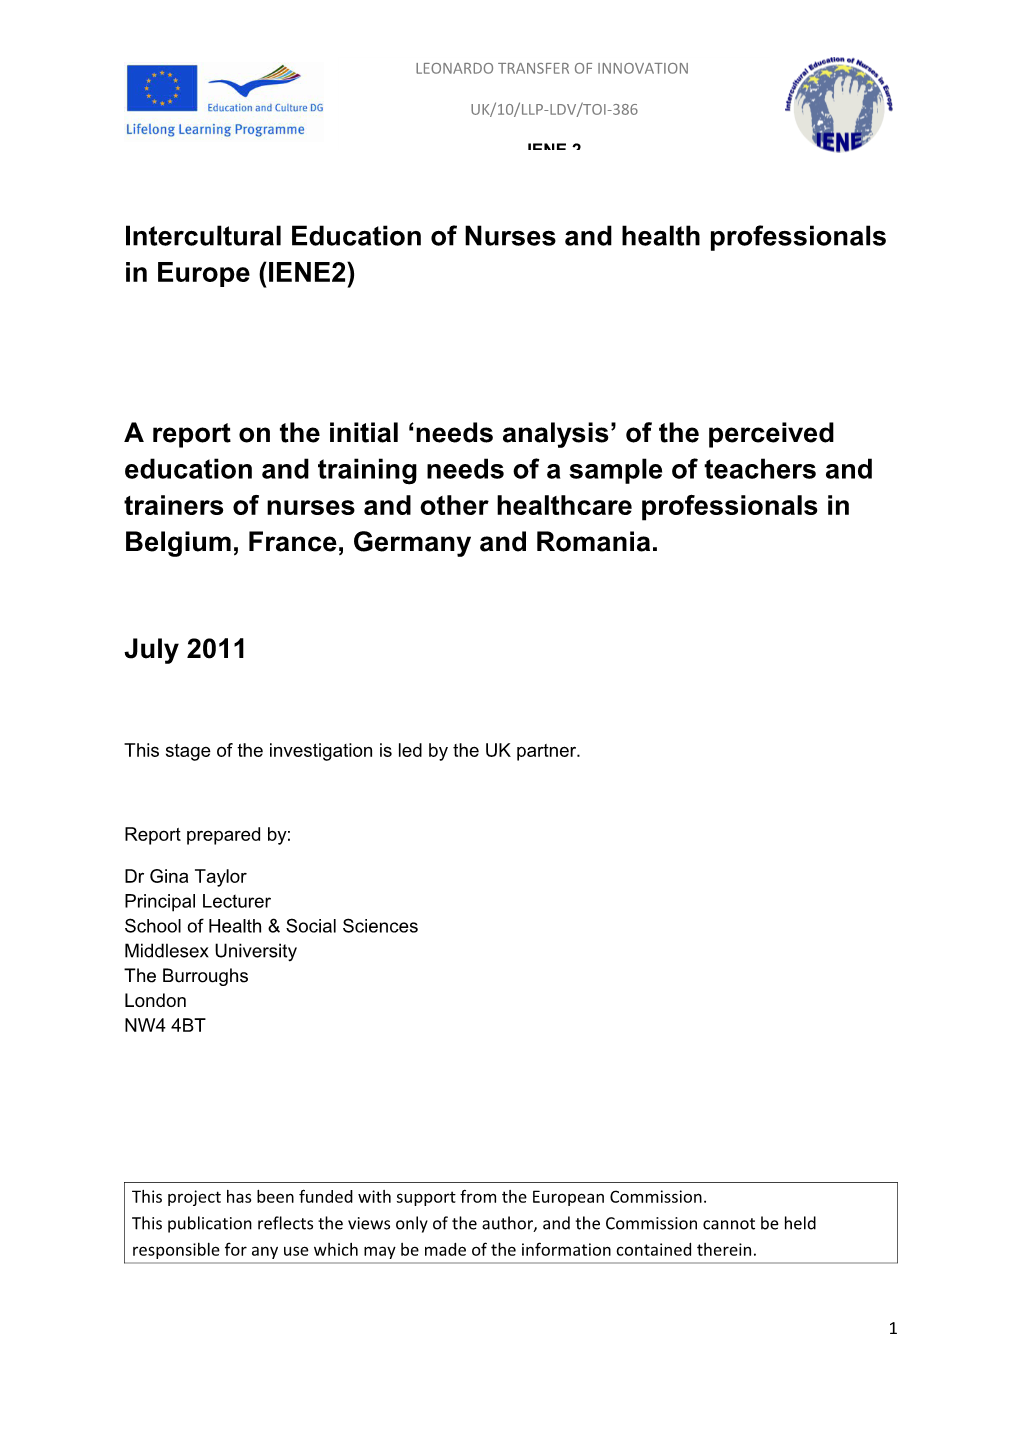 Intercultural Education of Nurses and Health Professionals in Europe (IENE2)